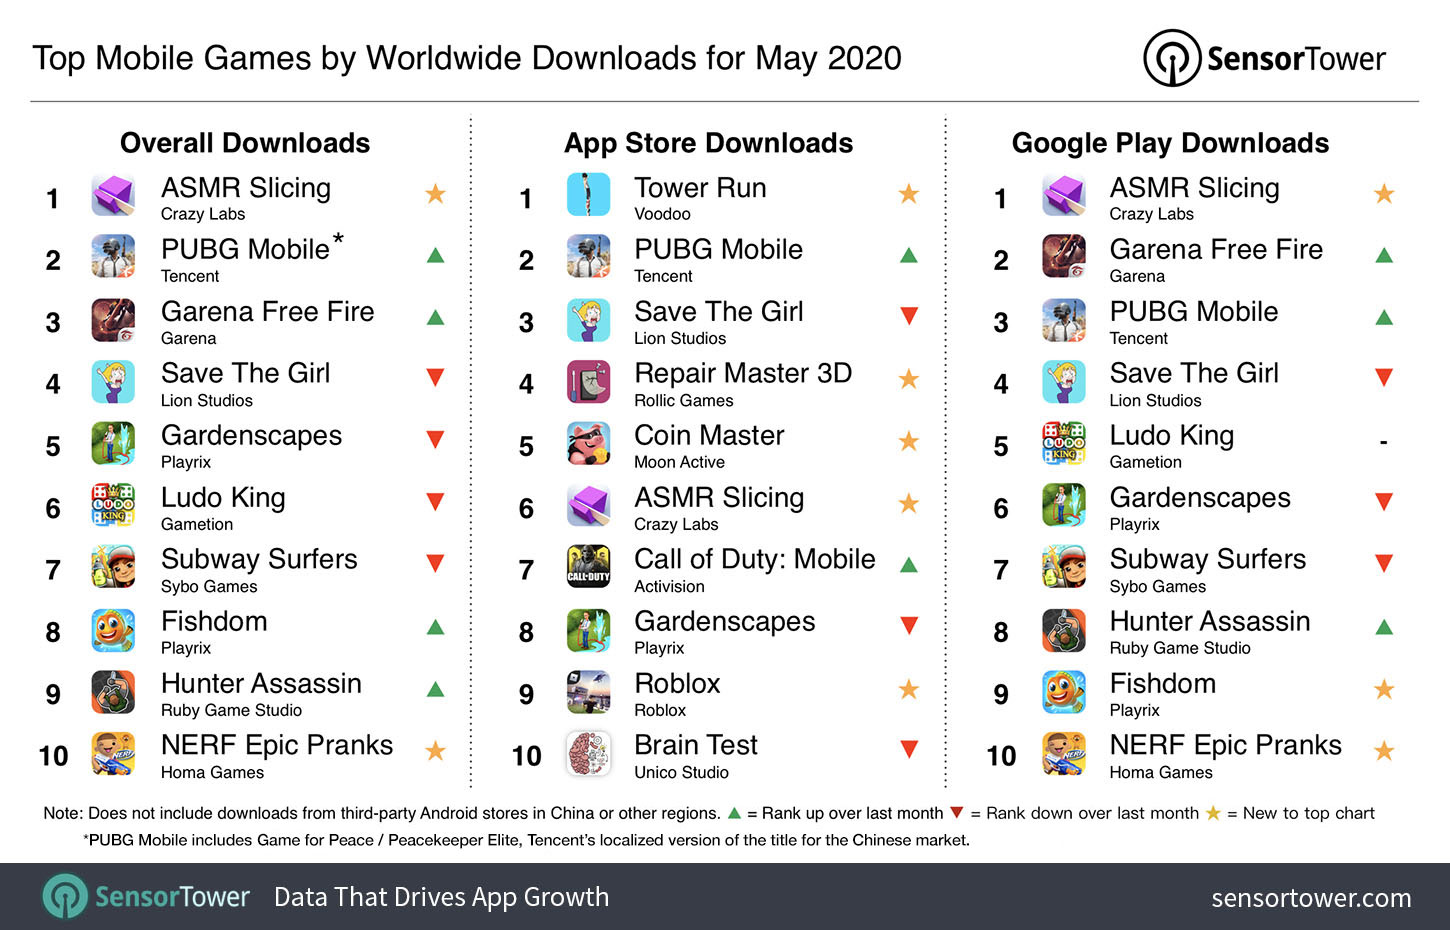 Smartphone Statistics And Tablet Usage Patterns The Hows The Whys And The Wheres - global spending on roblox 2020 statista